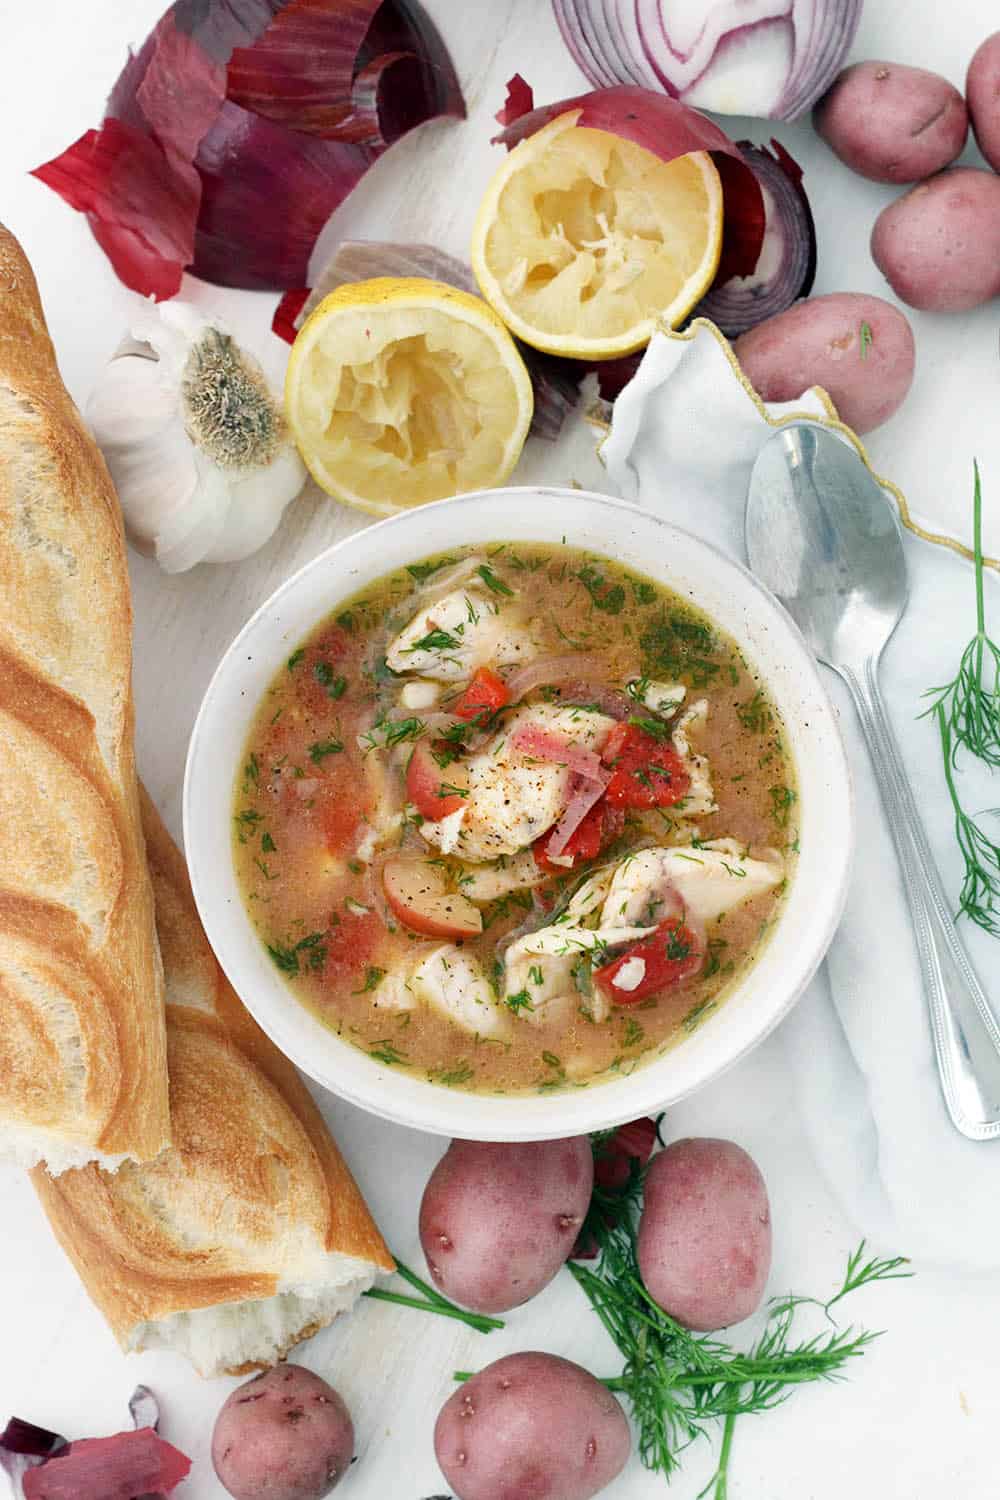 This Instant Pot Fish Stew is a delicious Mediterranean recipe year-round. It features sea bass, potatoes, and tomatoes, and it